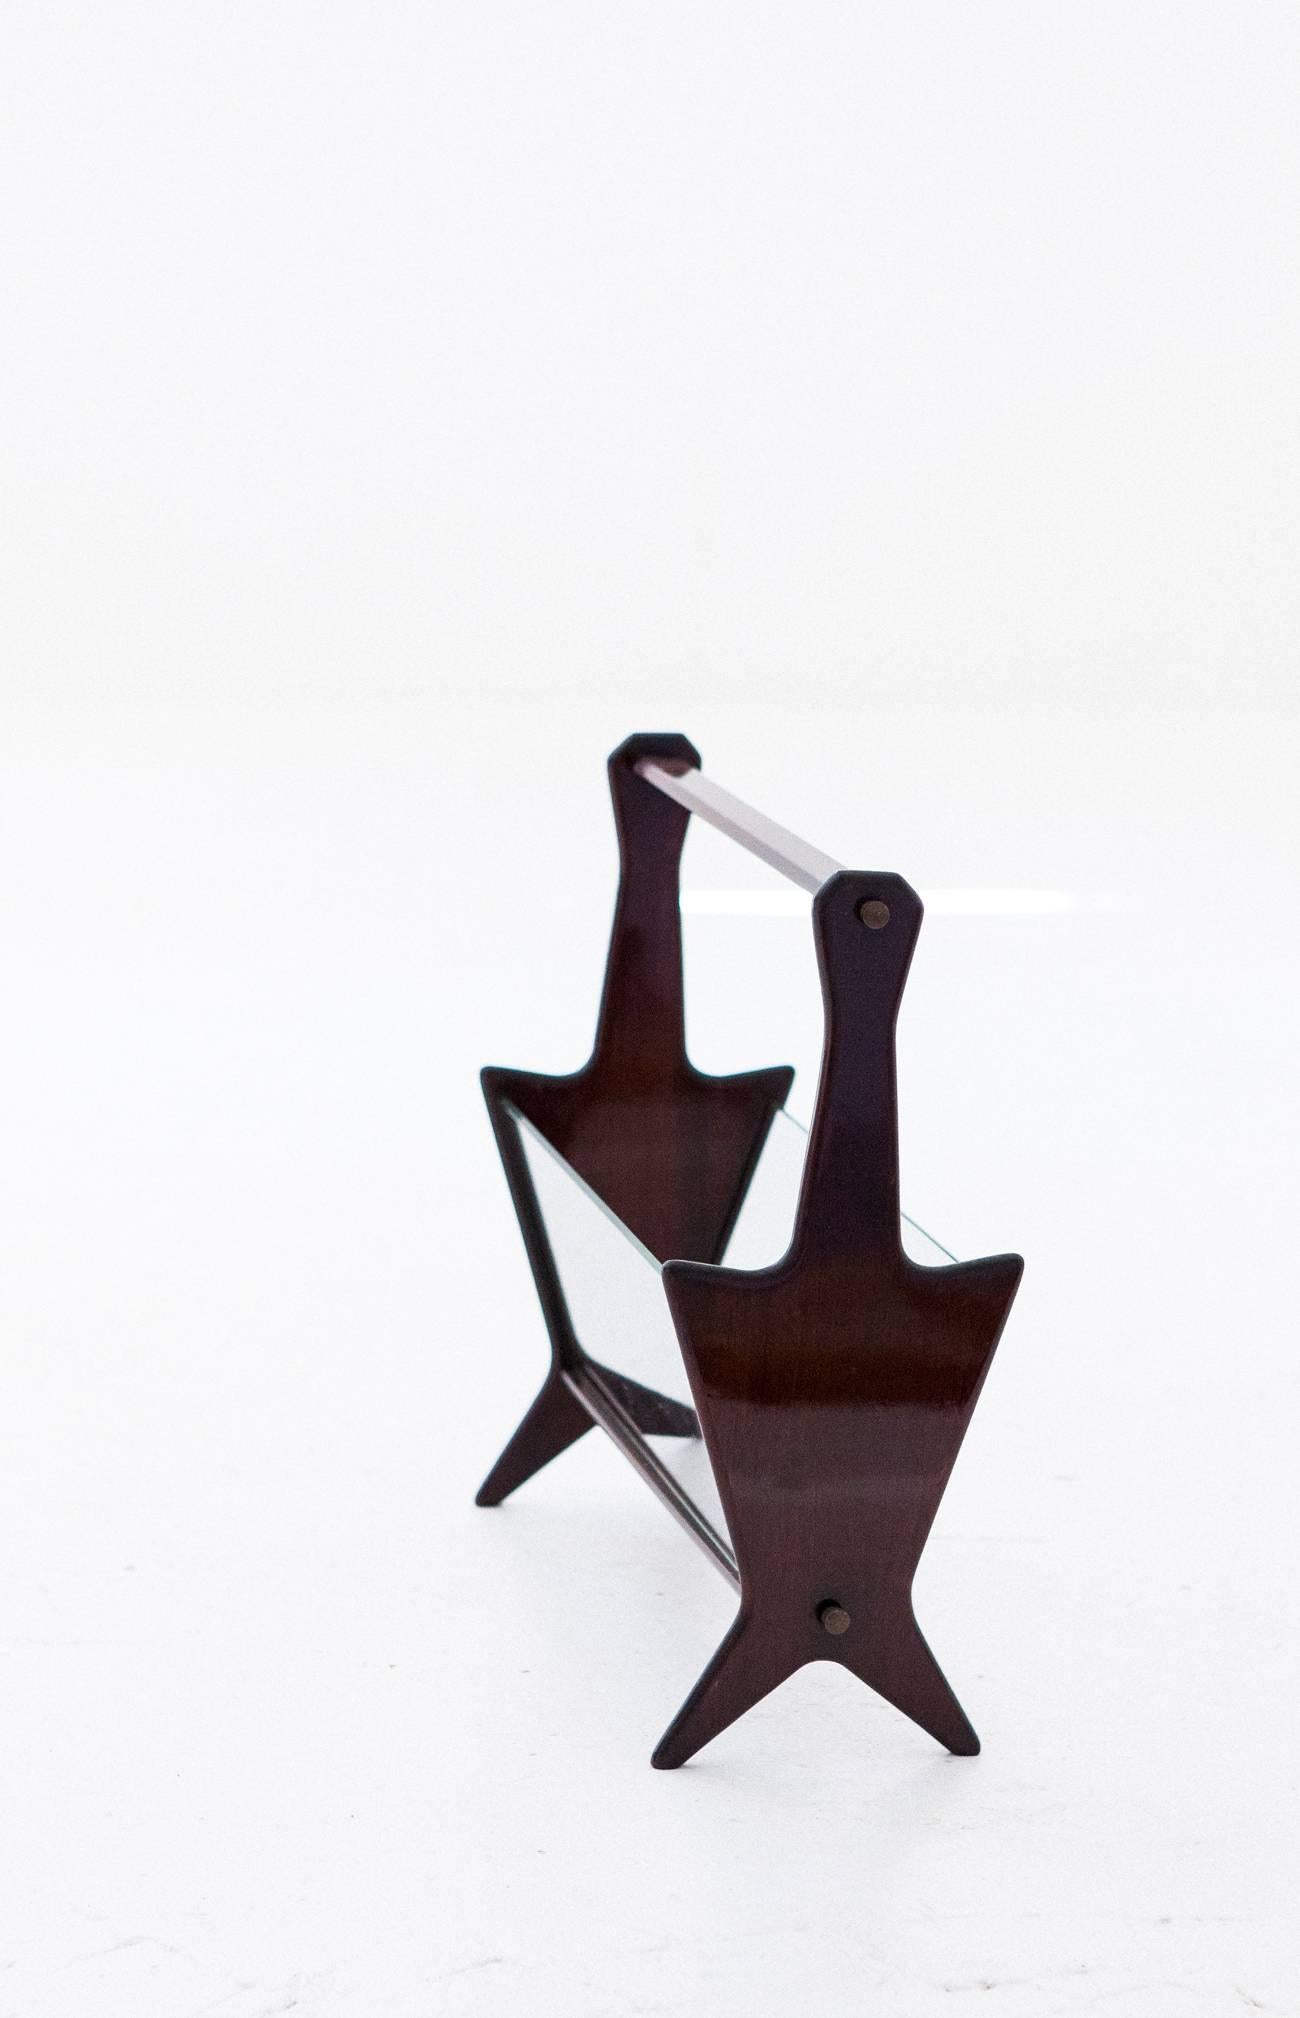 Magazine rack
Italian design attributed to Ico Parisi
Manufactured in 1950s
Mahogany wood, glass and brass details.